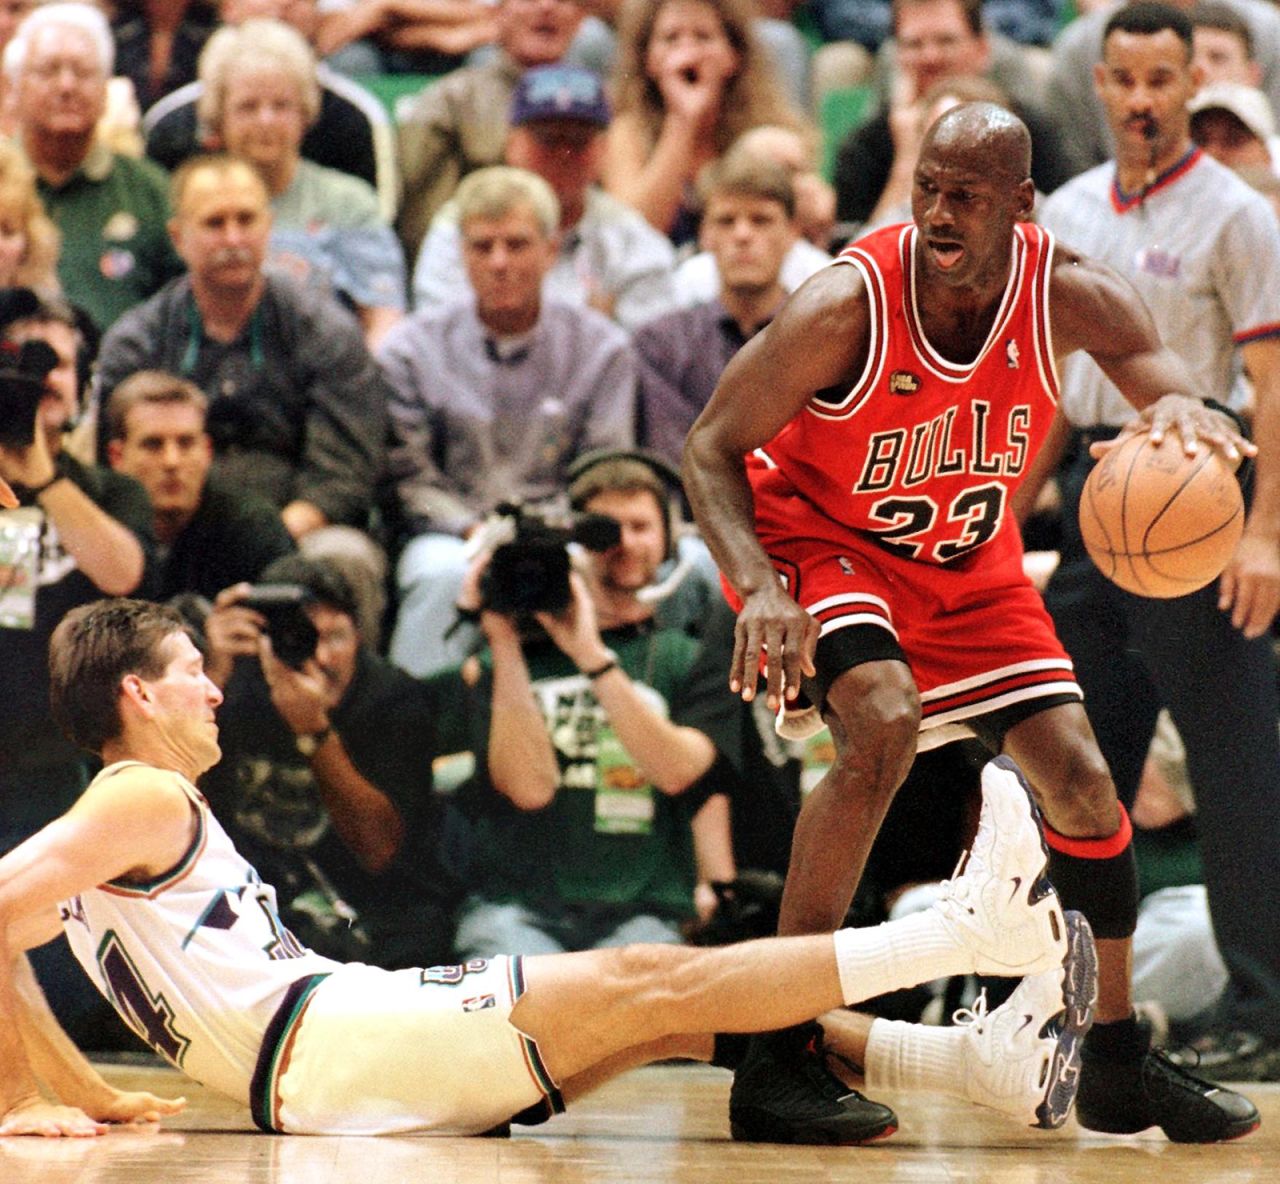 Michael Jordan pictured wearing these record-breaking sneakers during the NBA Finals at the Delta Center in Salt Lake City, Utah on June 5, 1998.